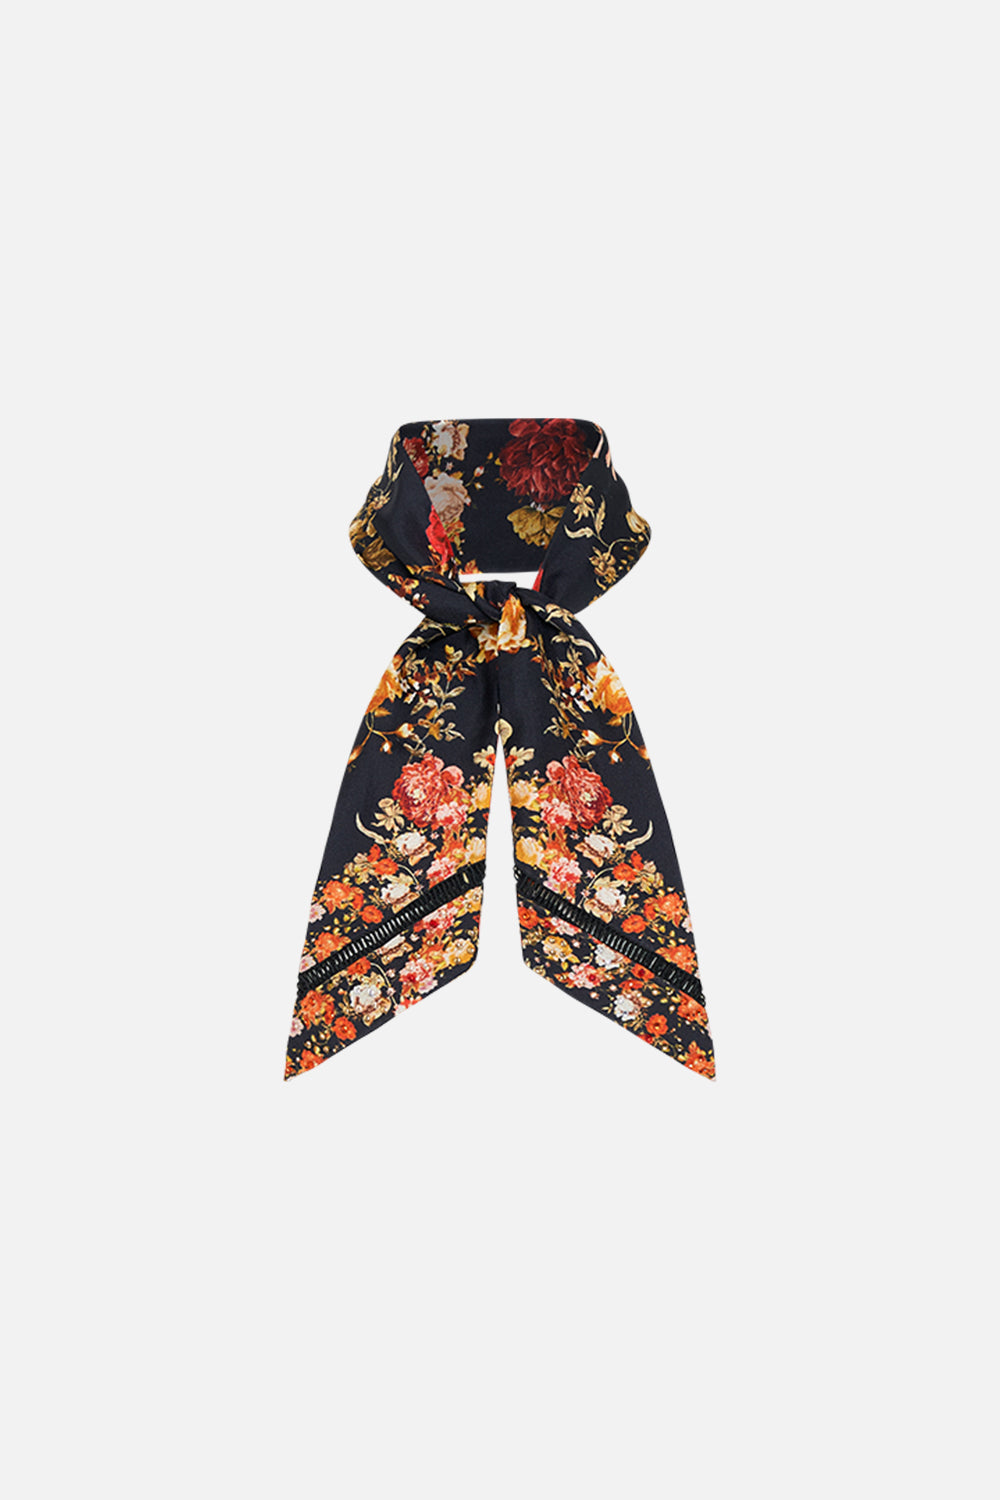 CAMILLA floral skinny neck scarf in Stitched in Time